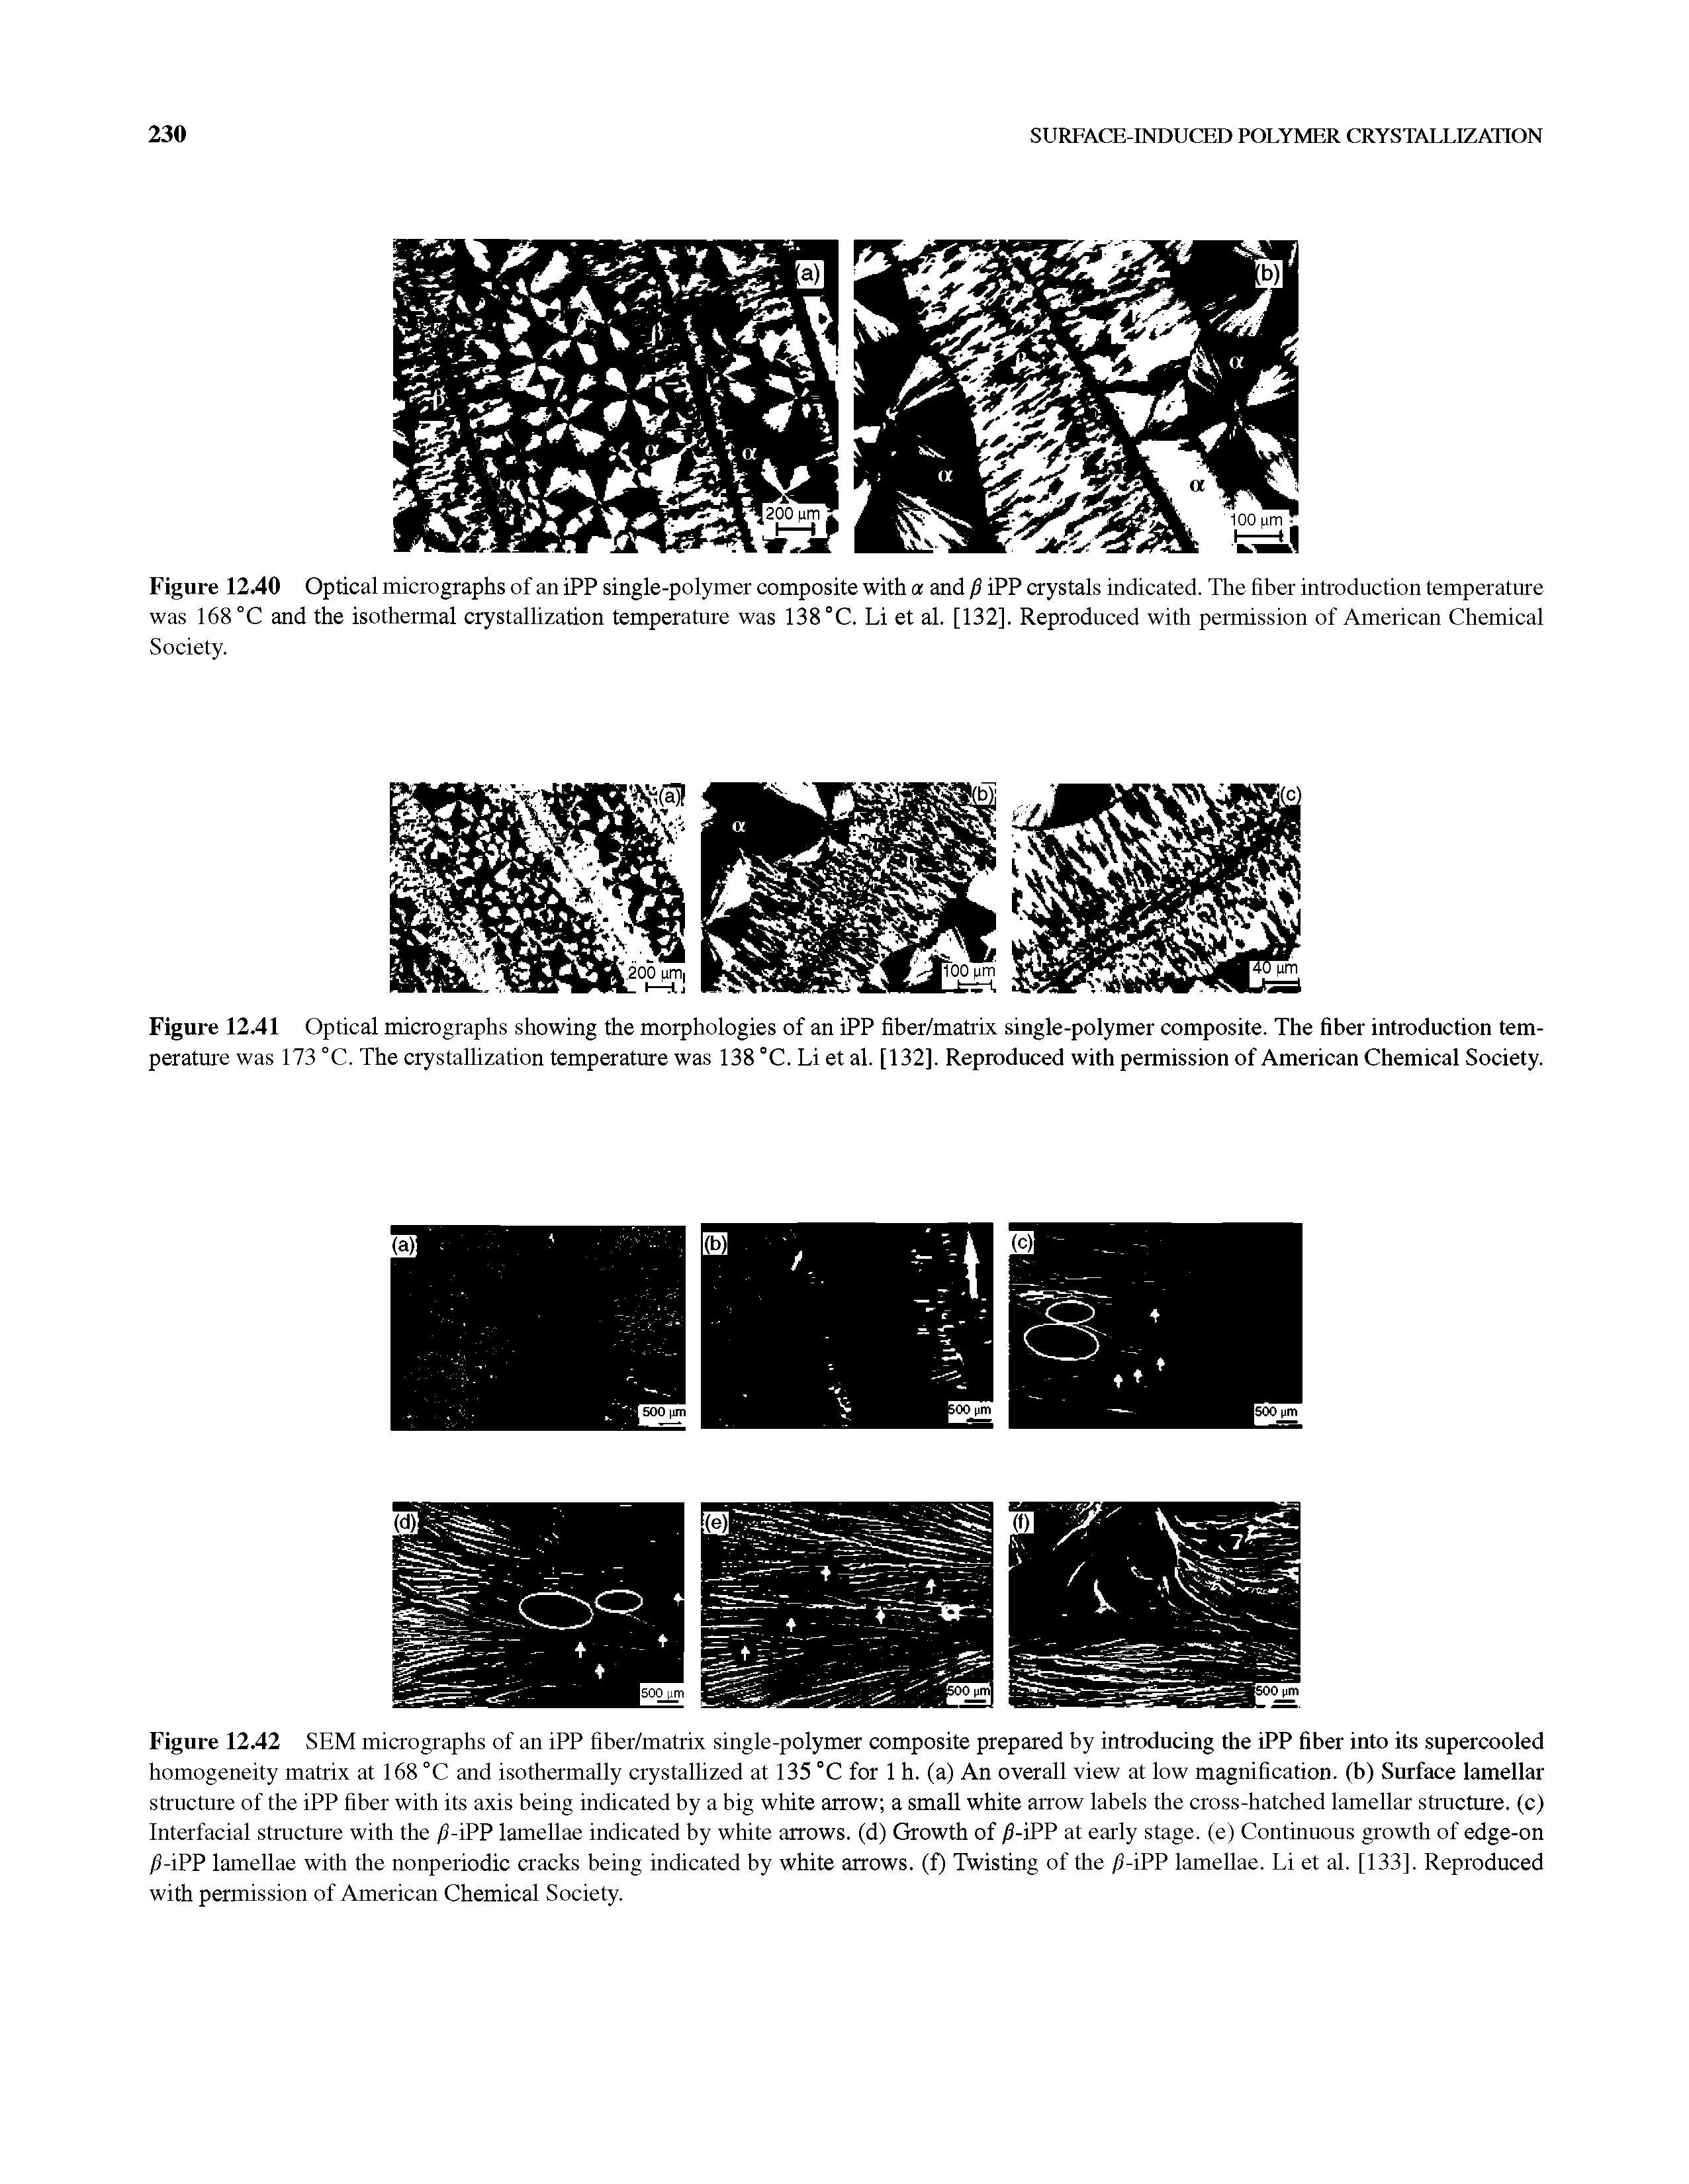 Figure 12.41 Optical micrographs showing the morphologies of an iPP fiber/matrix single-polymer composite. The fiber introduction temperature was 173 °C. The crystallization temperature was 138 °C. Li et al. [132]. Reproduced with permission of American Chemical Society.